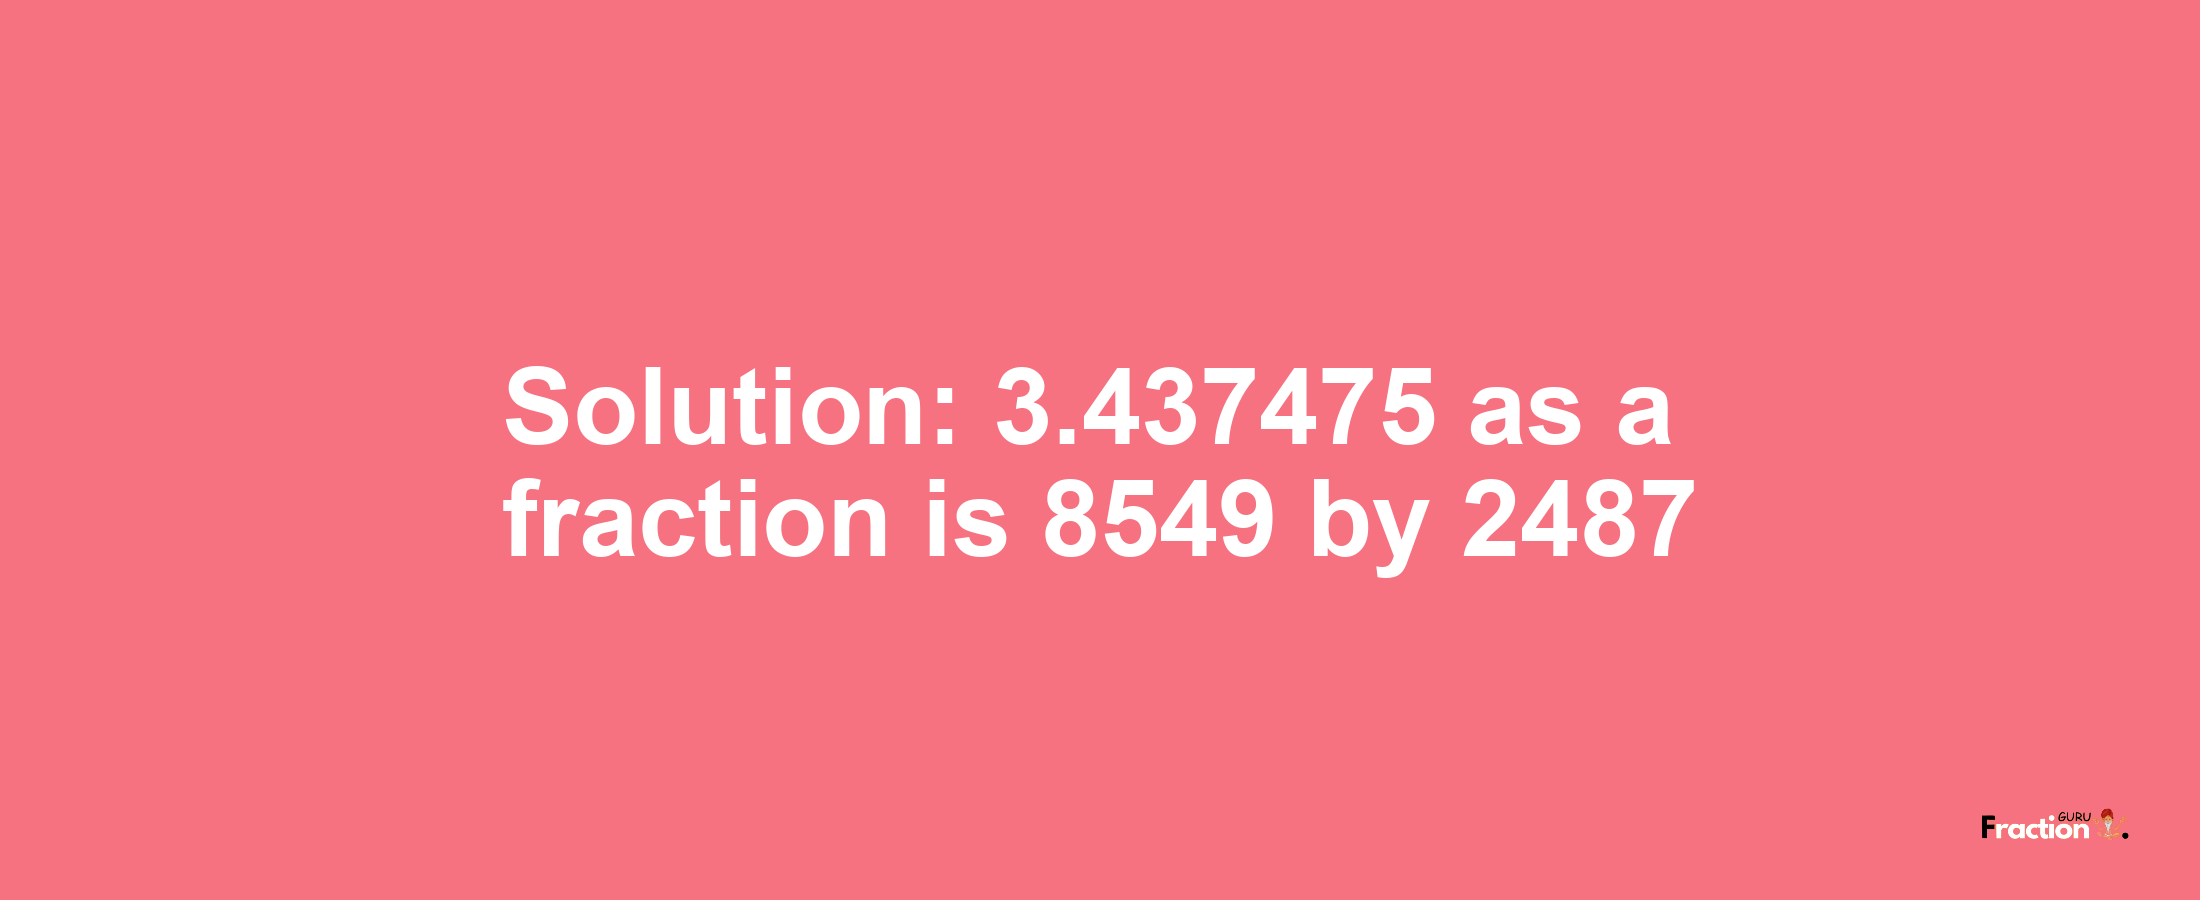 Solution:3.437475 as a fraction is 8549/2487